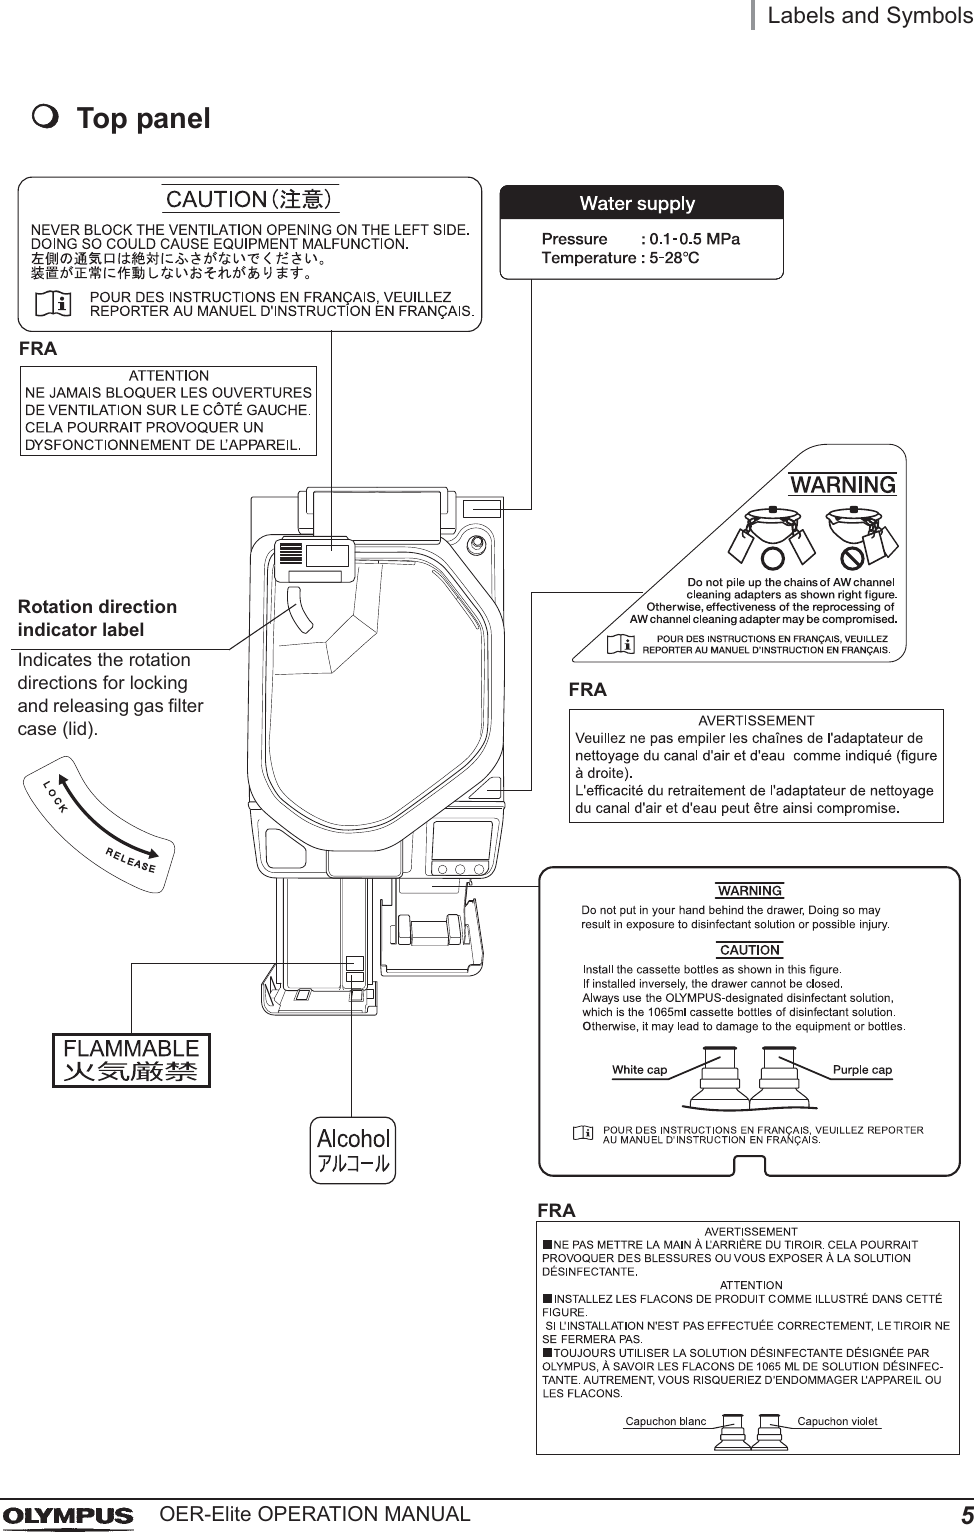 Labels and Symbols5OER-Elite OPERATION MANUALTop panelRotation direction indicator labelIndicates the rotation directions for locking and releasing gas filter case (lid).FRAFRAFRA